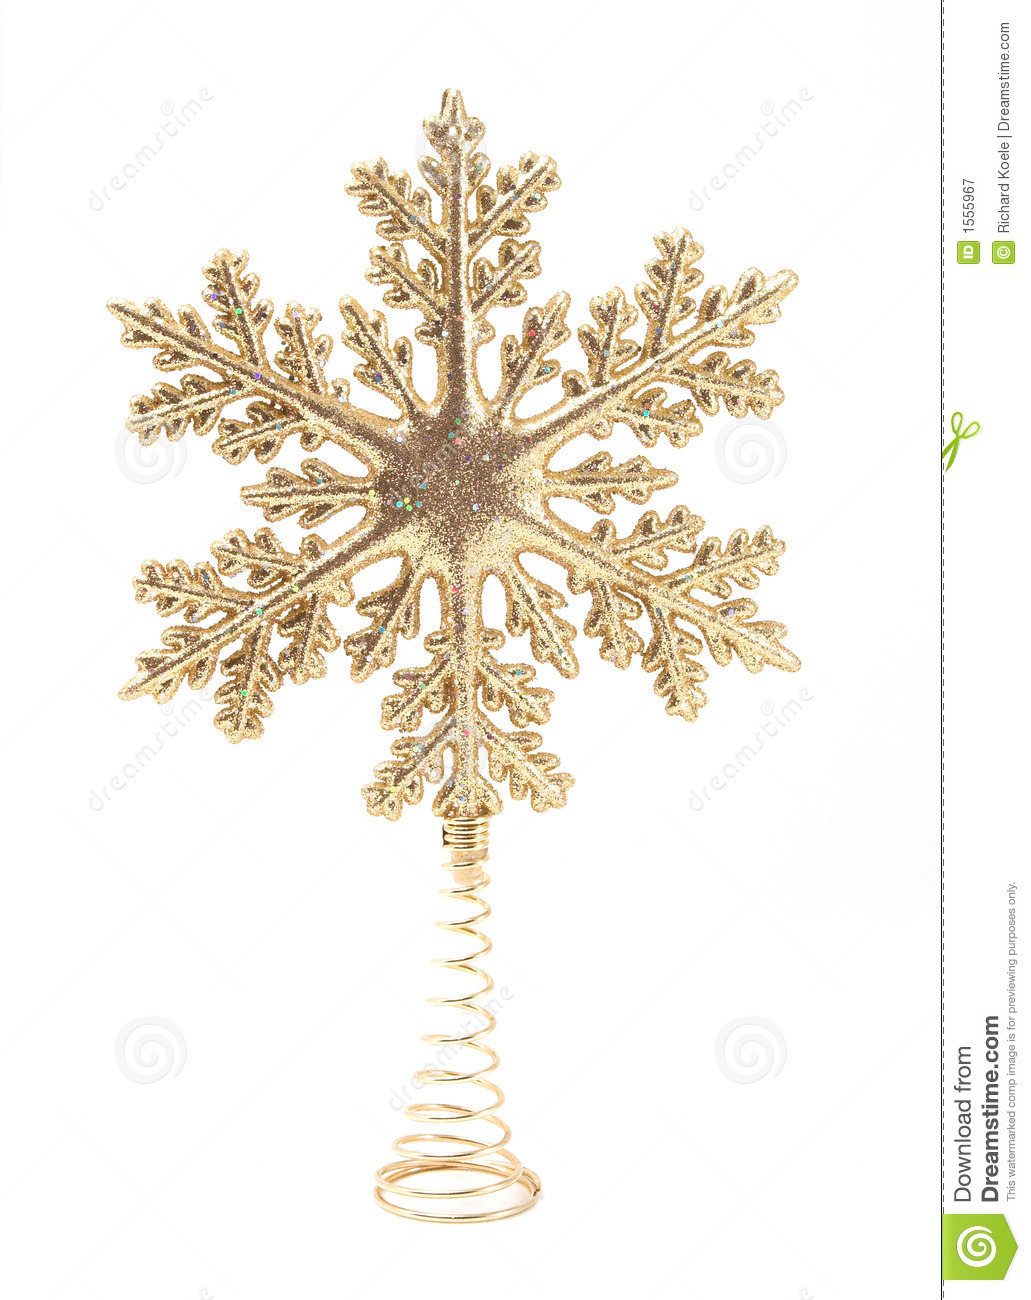 Christmas Tree Topper Royalty Free Stock Photography   Image  1555967